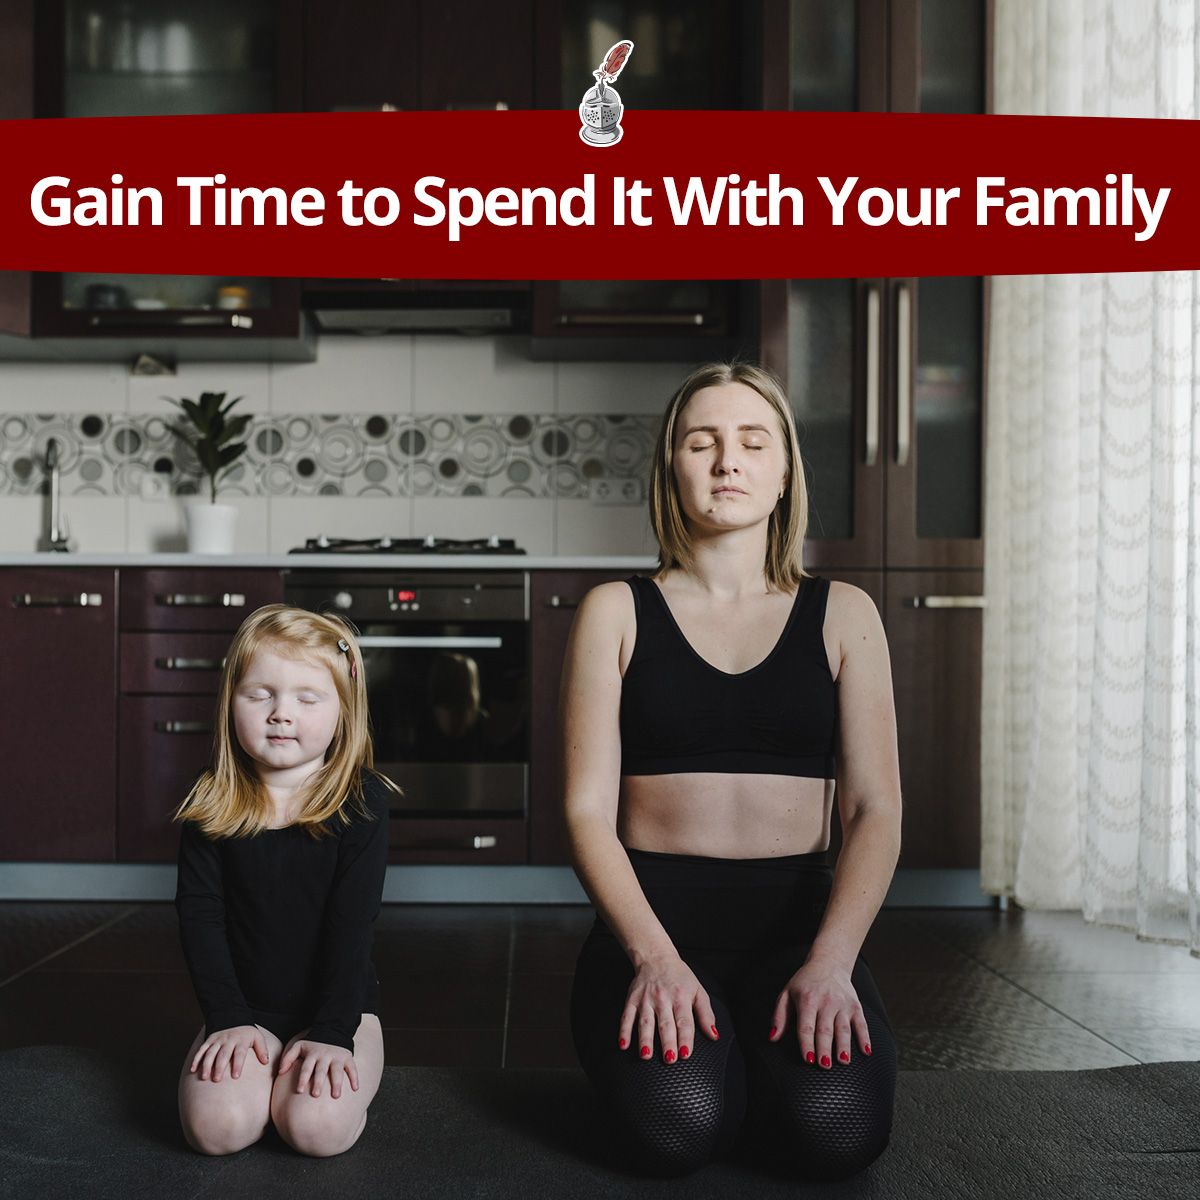 Gain Time to Spend It With Your Family